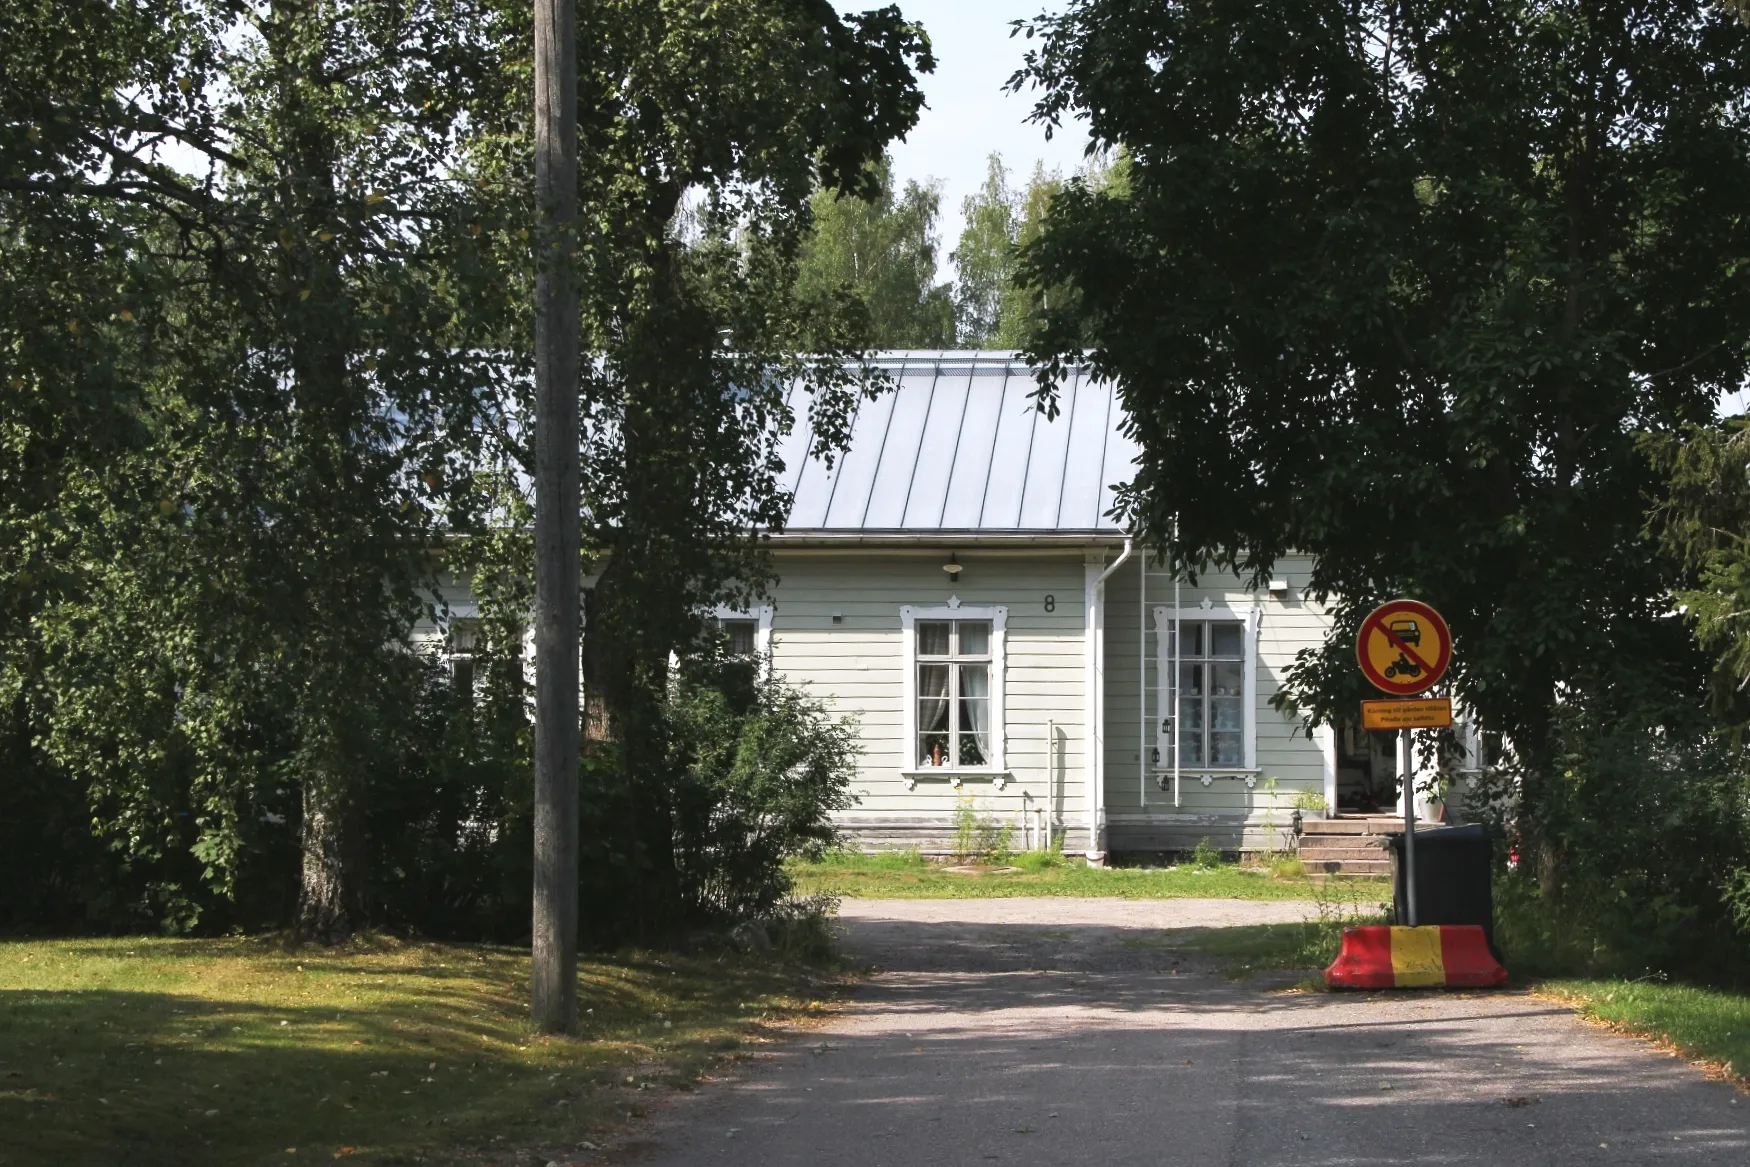 Photo showing: Now privately owned Svartå railway station, Karis, Finland